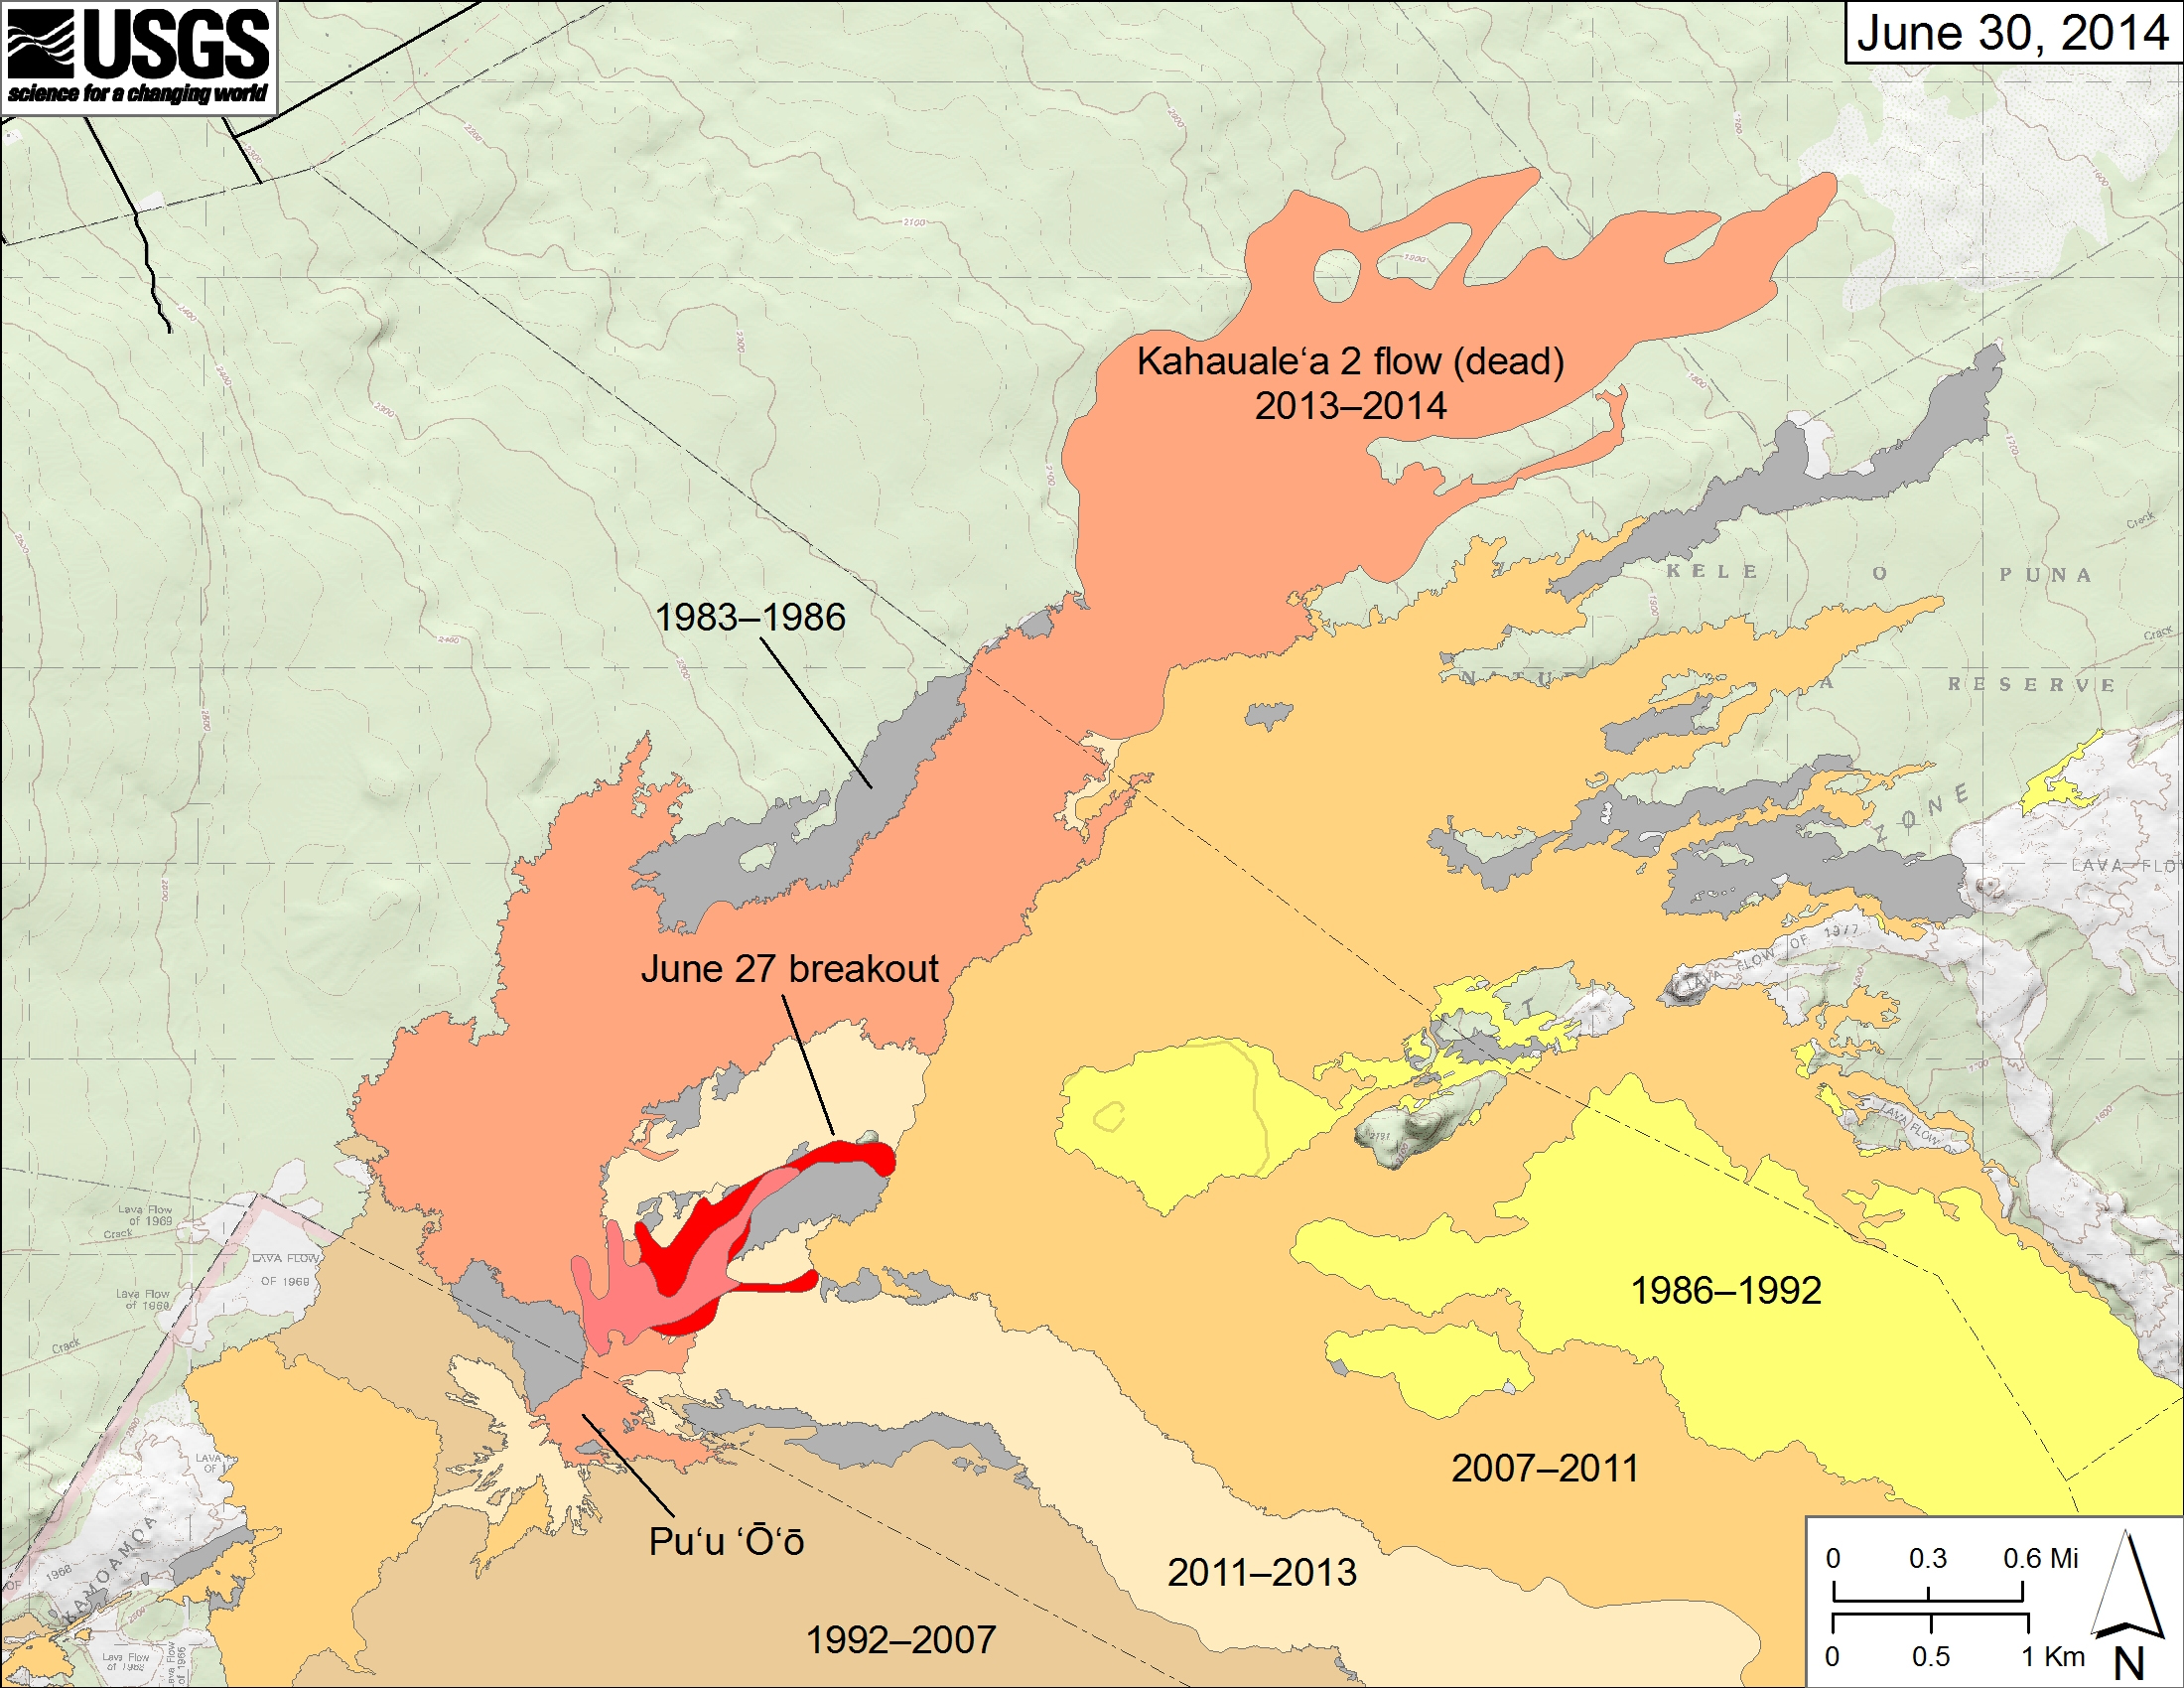 Map showing the June 27, 2014, breakout at Puʻu ʻŌʻō in Kīlauea’s East Rift Zone. The area of the new flow as mapped on June 27 is shown in pink, while widening of the flow as June 30 is shown in red. Older lava flows are distinguished by color: episodes 1–48b flows (1983–1986) are shown in gray; episodes 48c–49 flows (1986–1992) are yellow; episodes 50–55 flows (1992–2007) are tan; episodes 58–60 flows (2007–2011) are pale orange, and 2011–2013 episode 61 flows are very light tan. The 2013–2014 Kahaualeʻa 2 flow, which is now dead, is reddish orange.